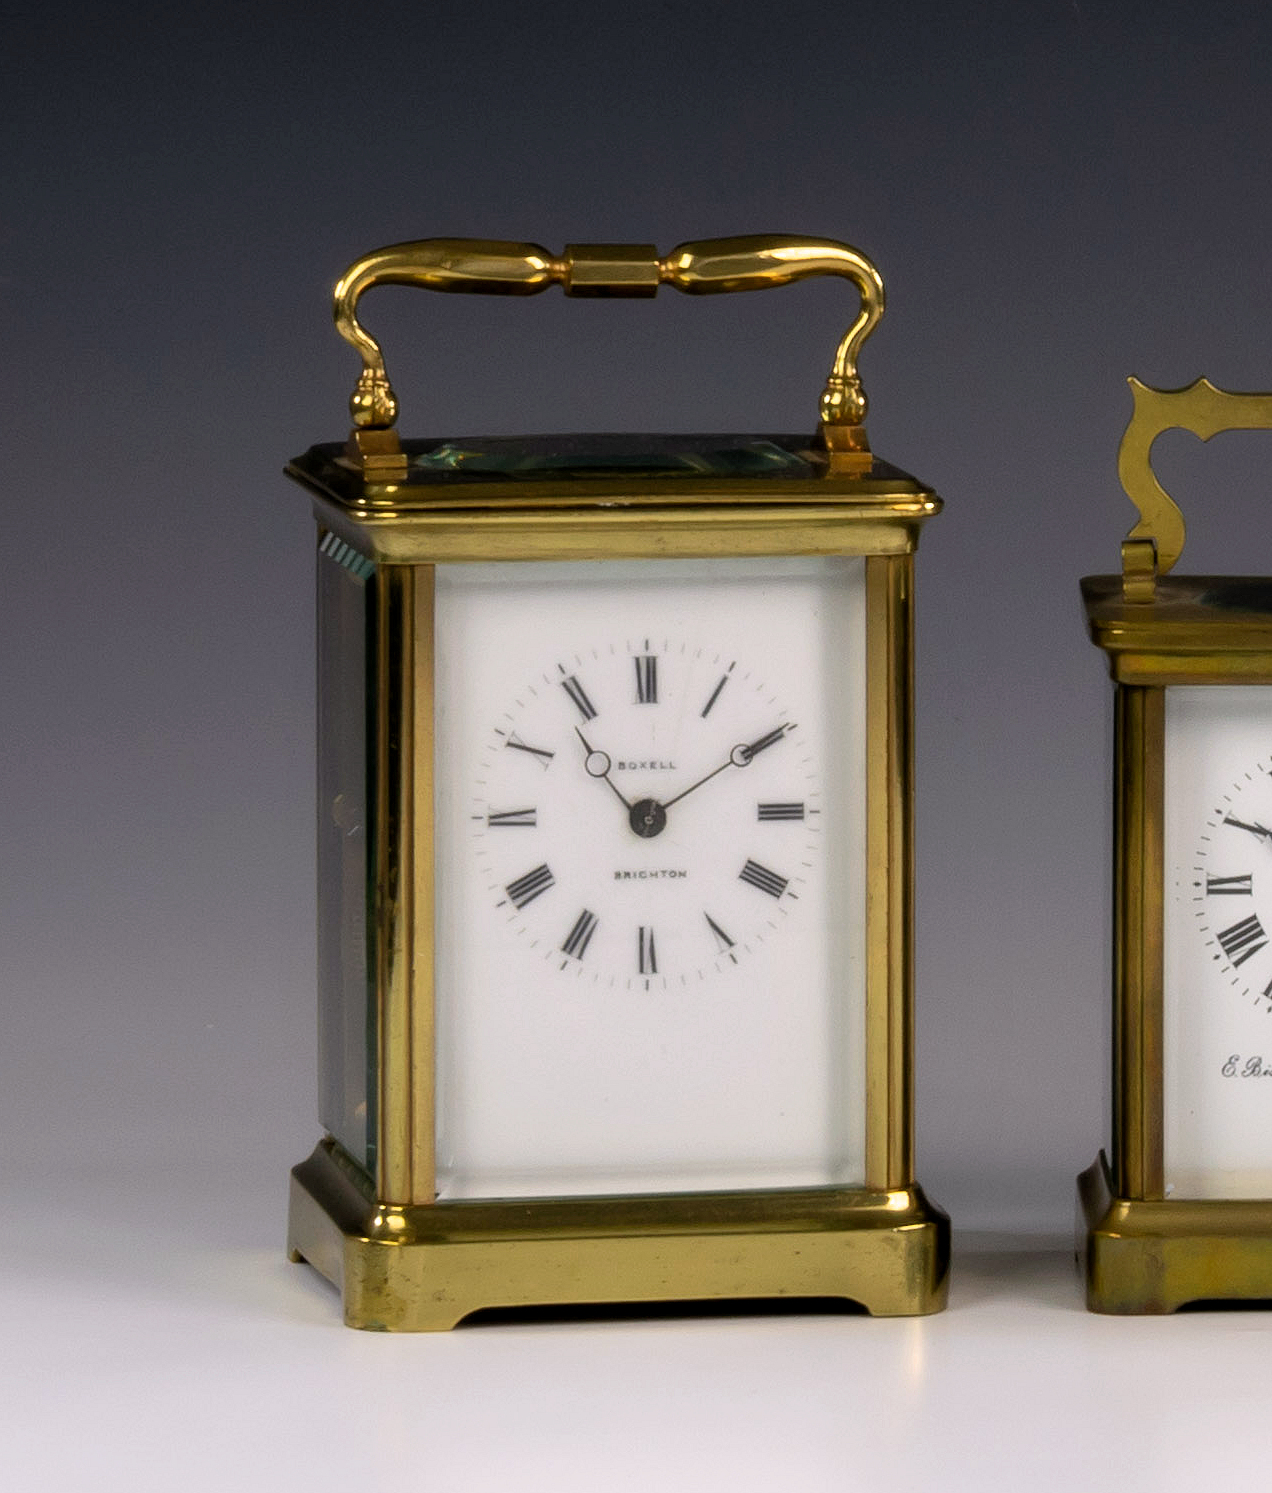 A French brass chiming carriage clock, c.1900, possibly by Couaillet, with Corniche case, white